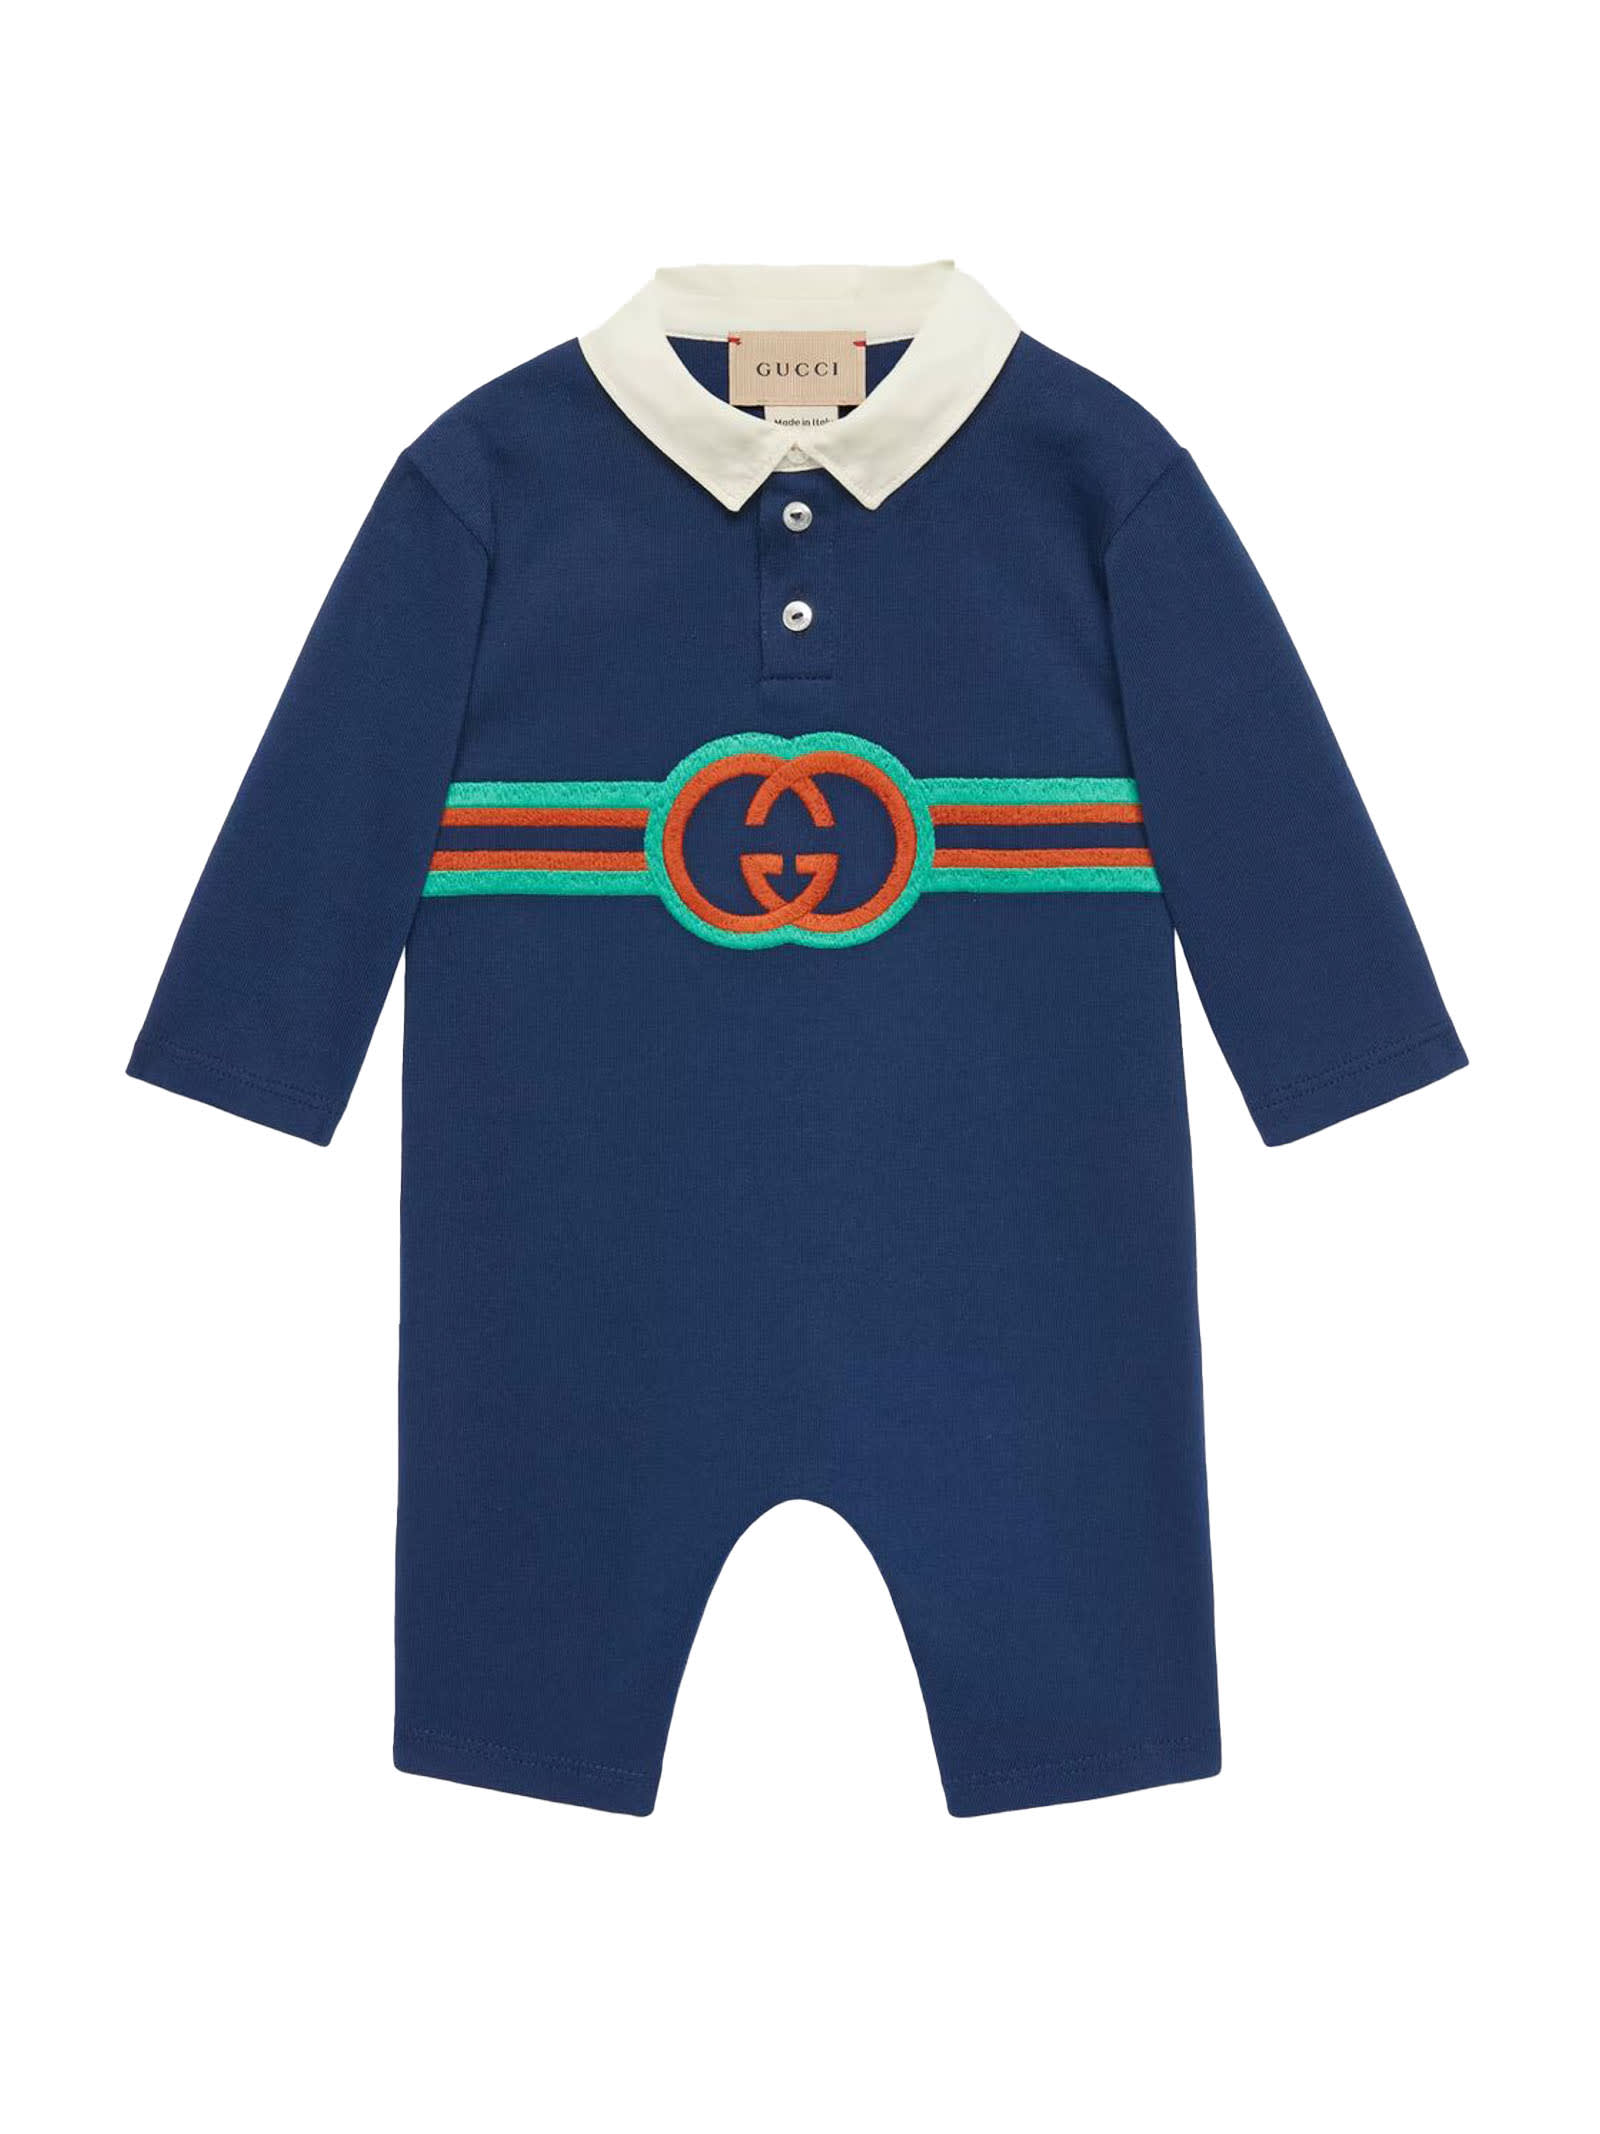 Gucci Baby One-Piece with Web